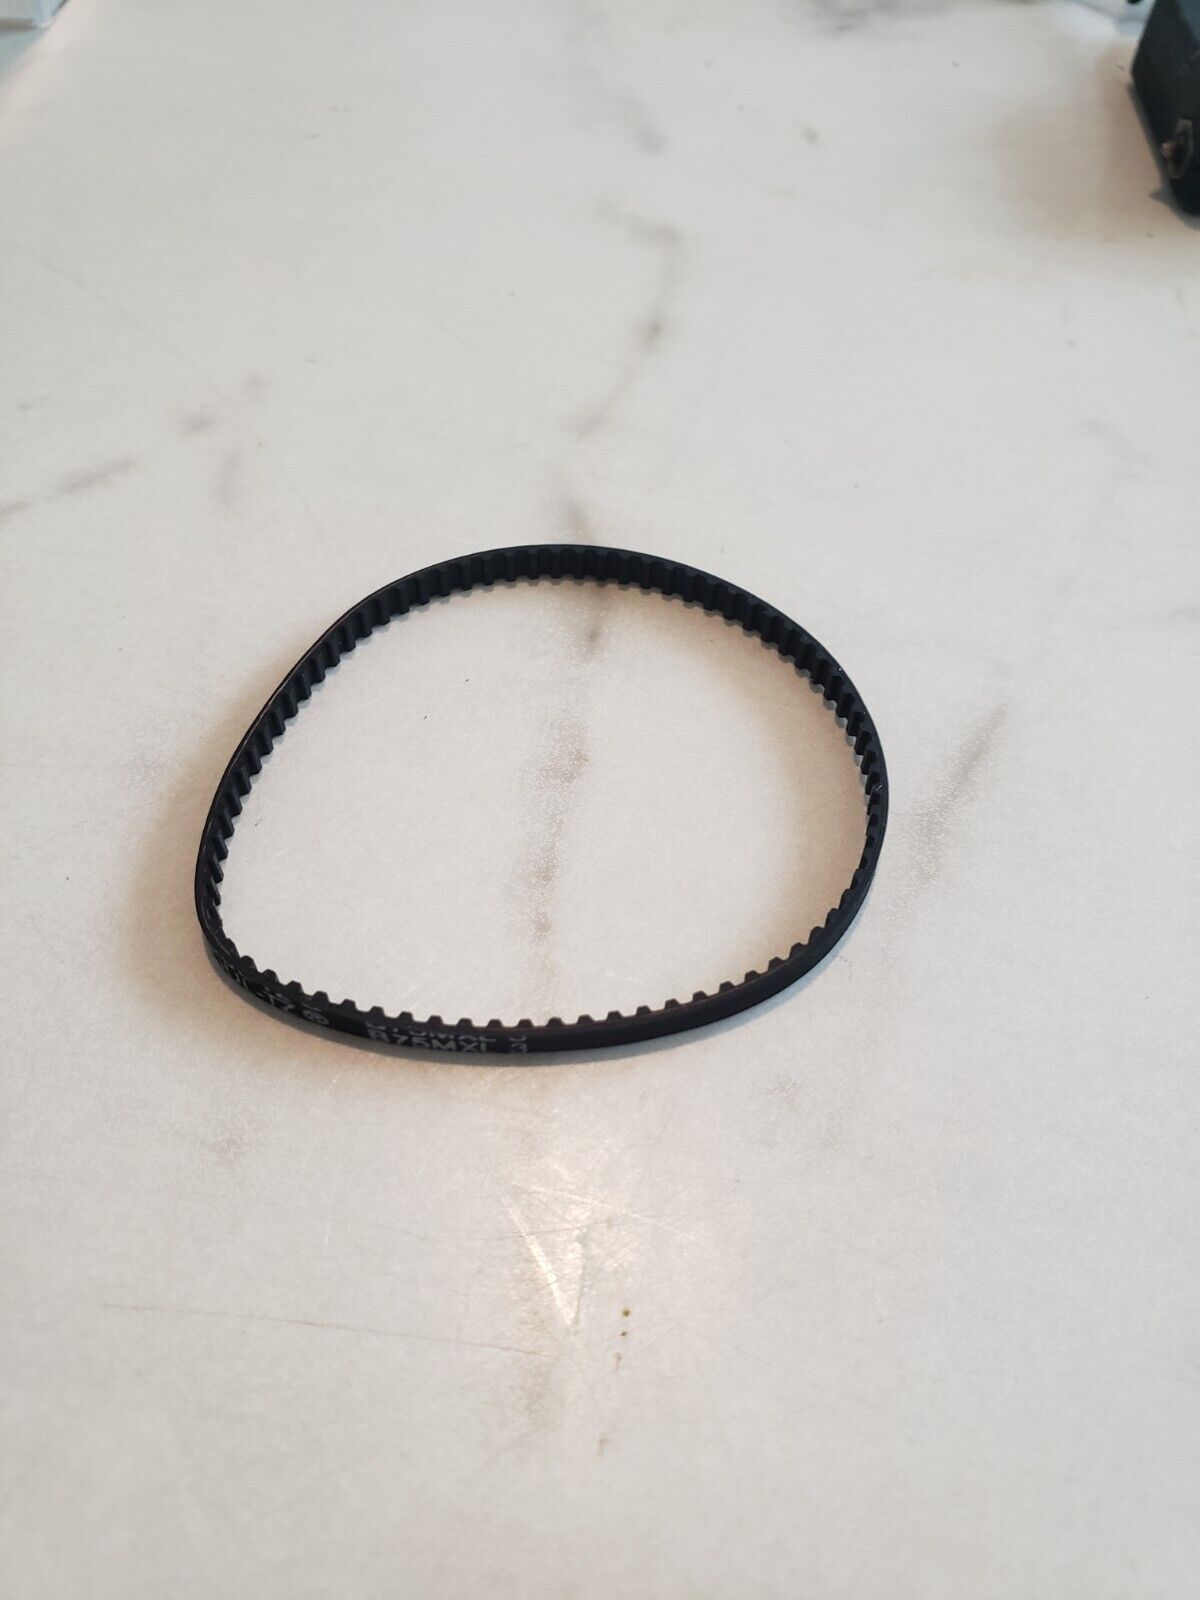 New Matter MOD-T 3D Printer Replacement Parts Rubber Band